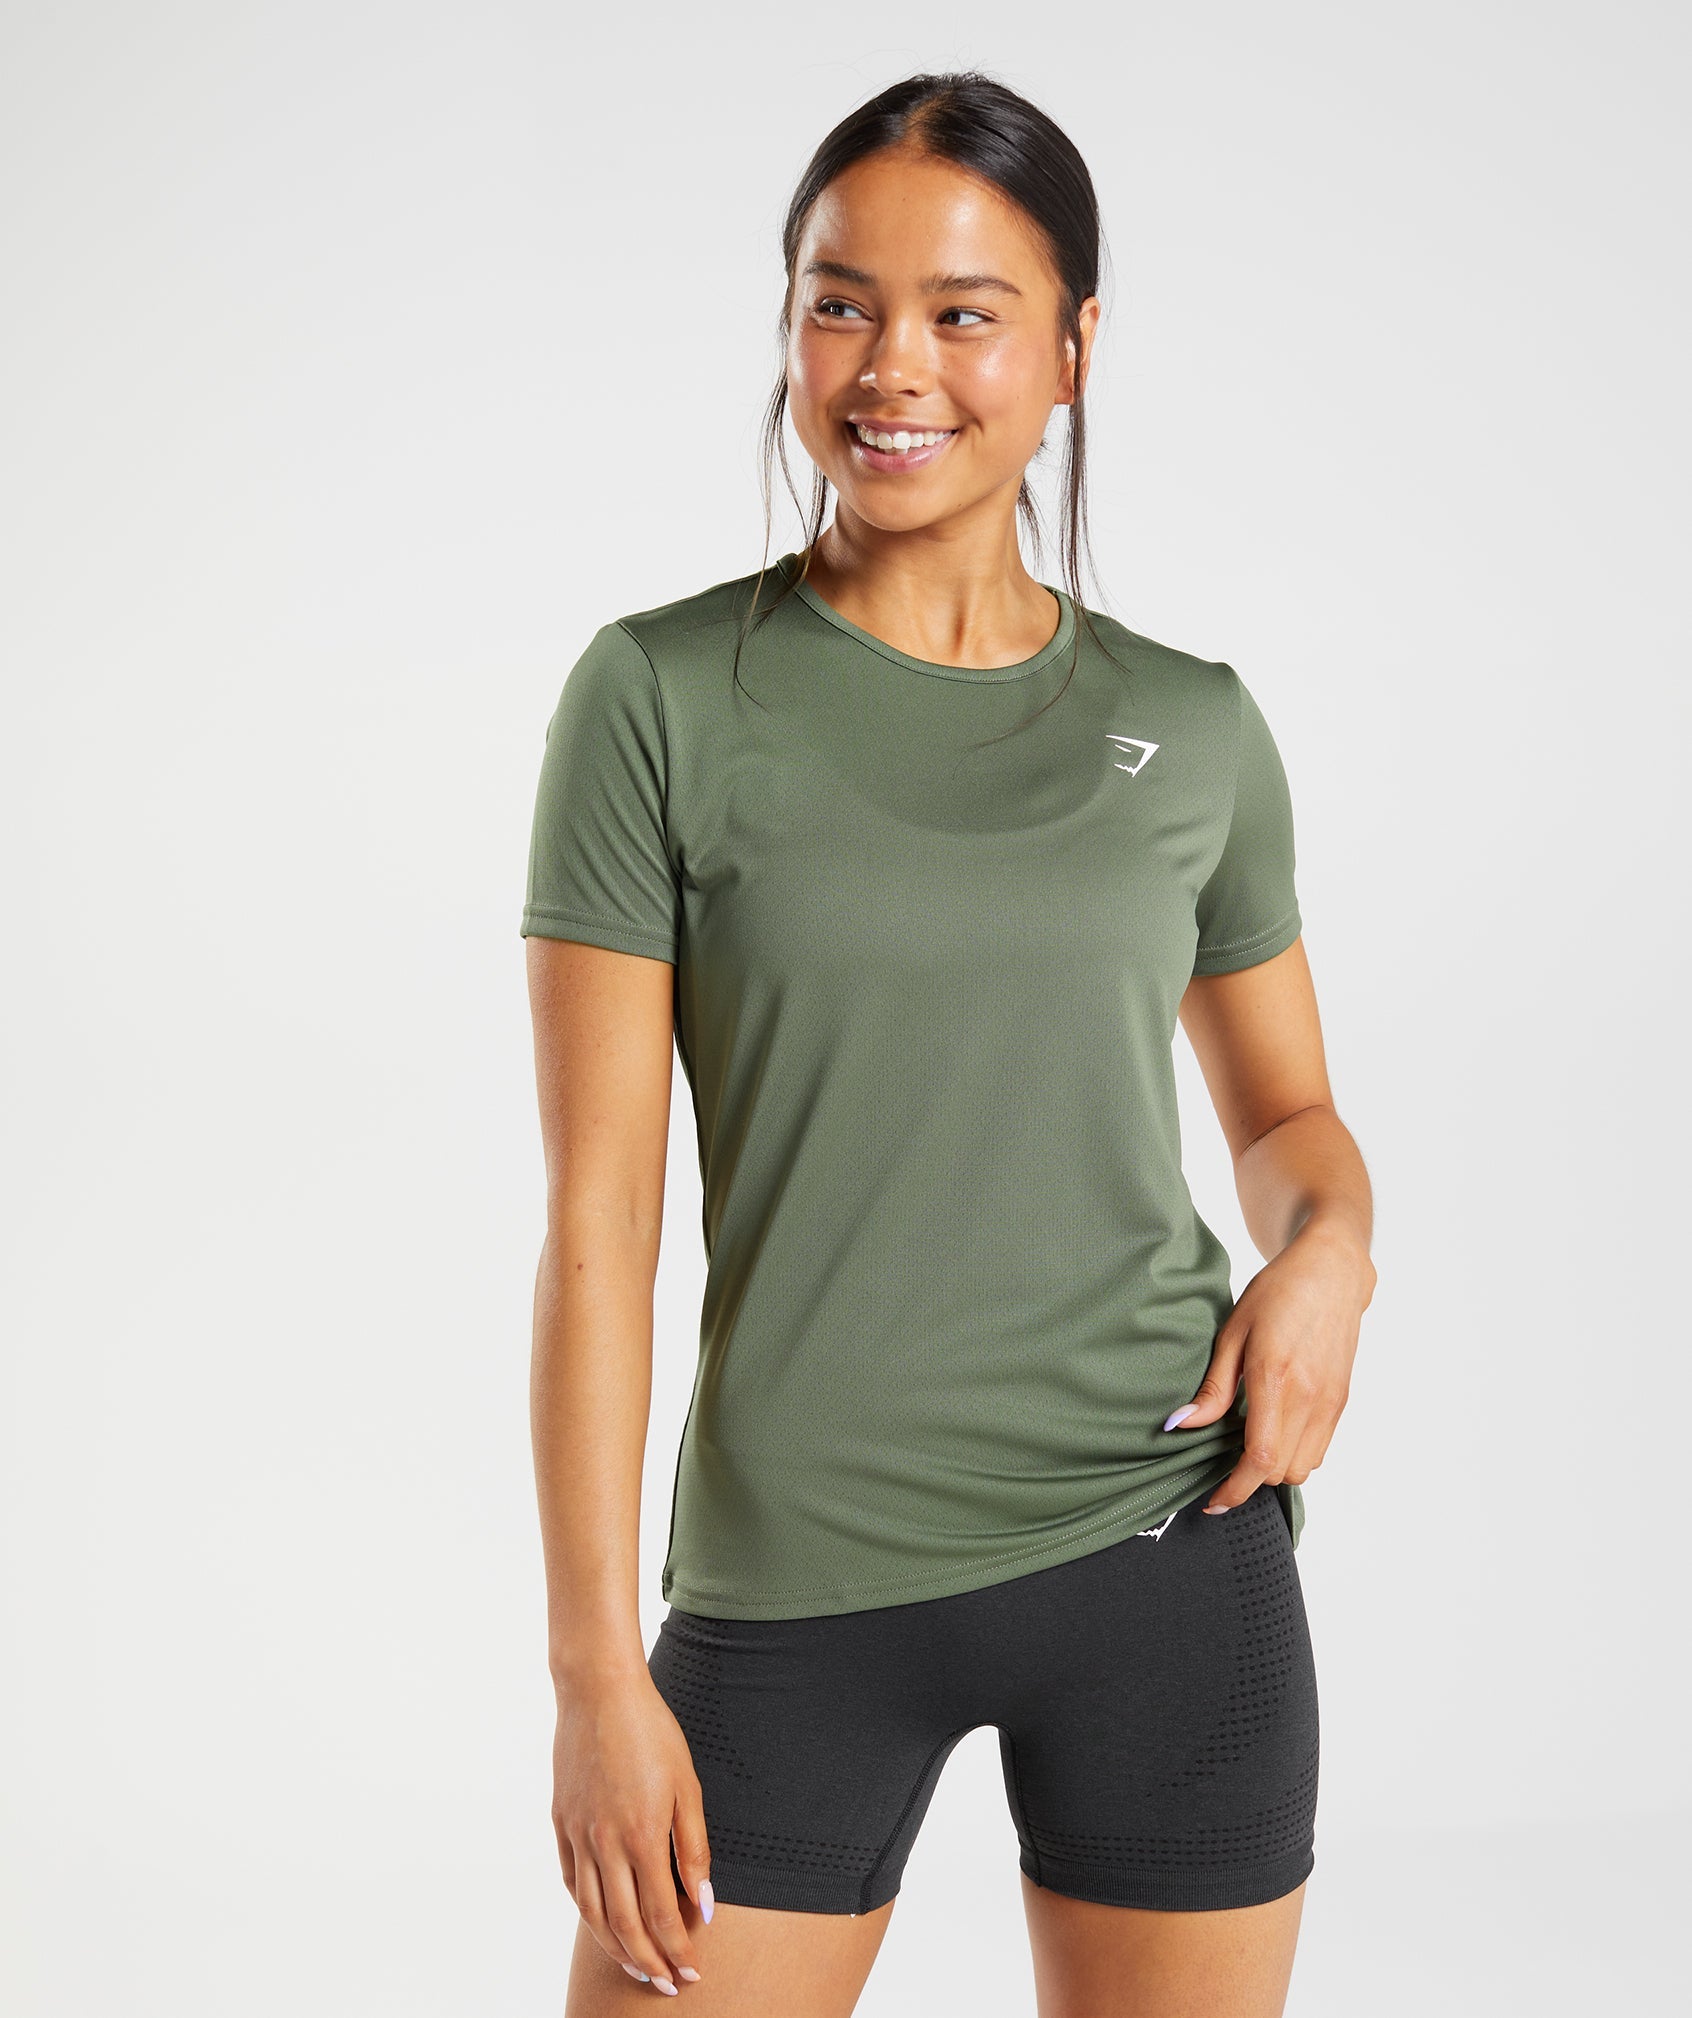 Training T-Shirt in Core Olive - view 1